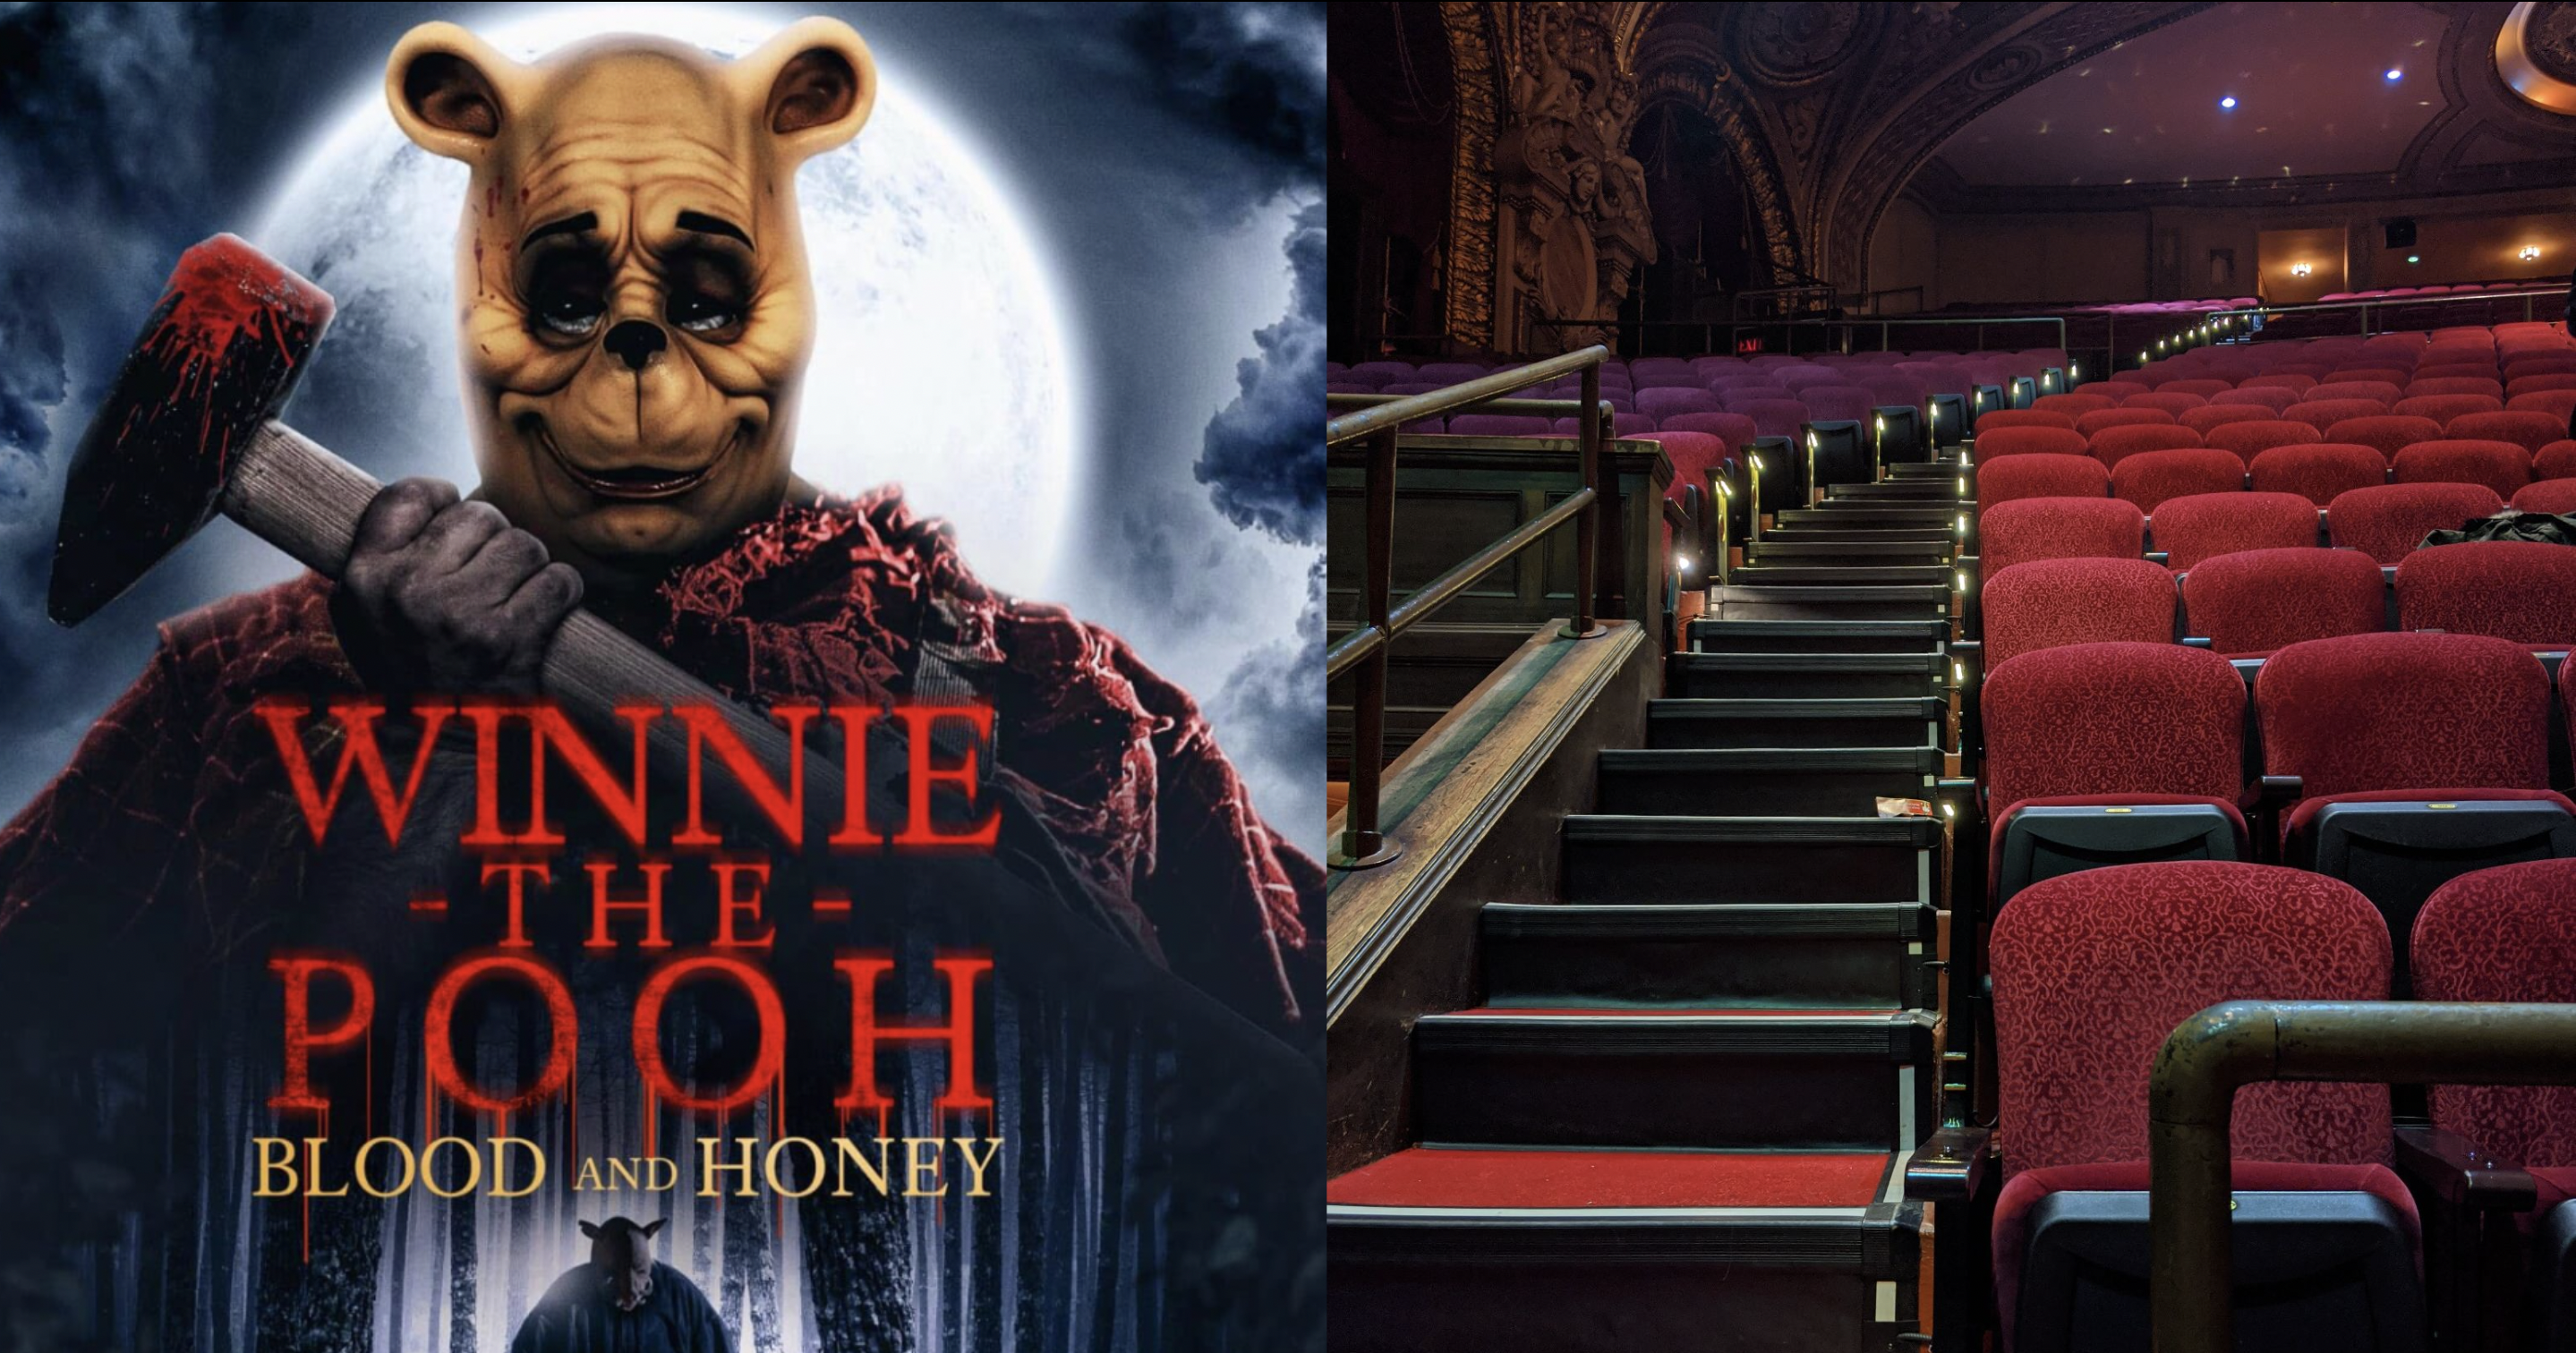 HK screening of Winnie the Pooh horror film cancelled due to 'technical  reasons' -  - News from Singapore, Asia and around the world